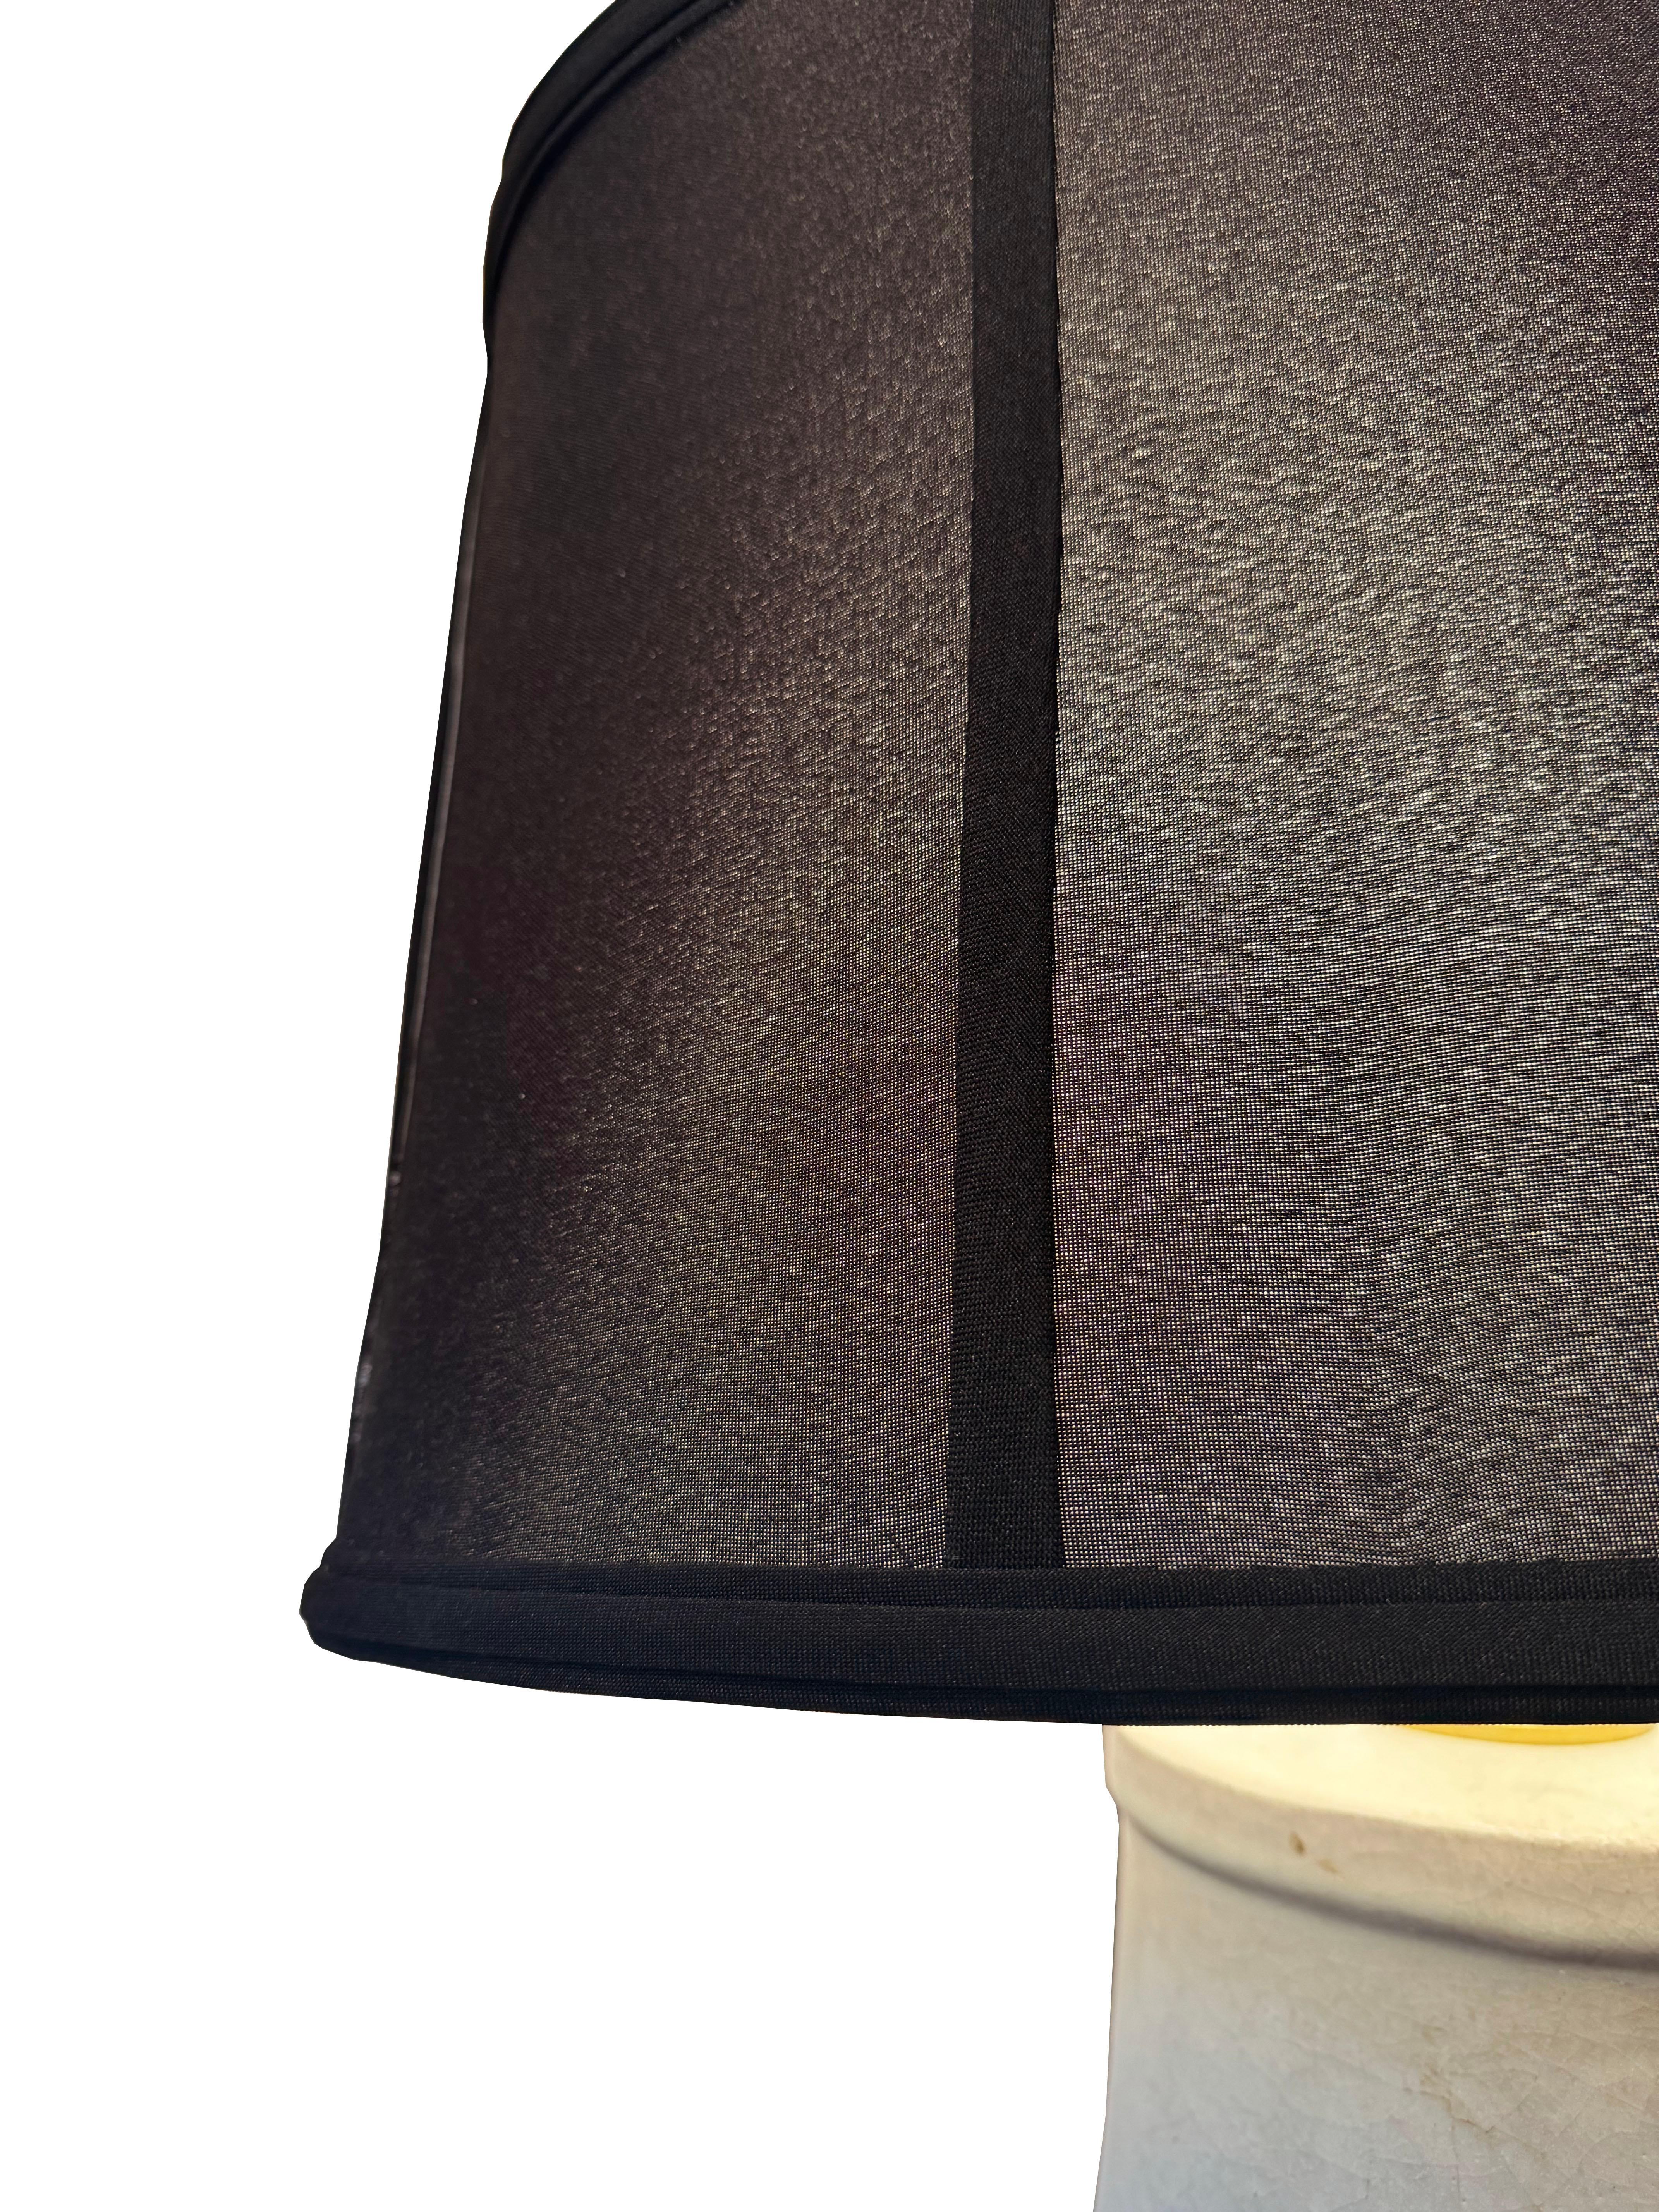 Ceramic Rose Tarlow Lamp w/ Black Oval Shade For Sale